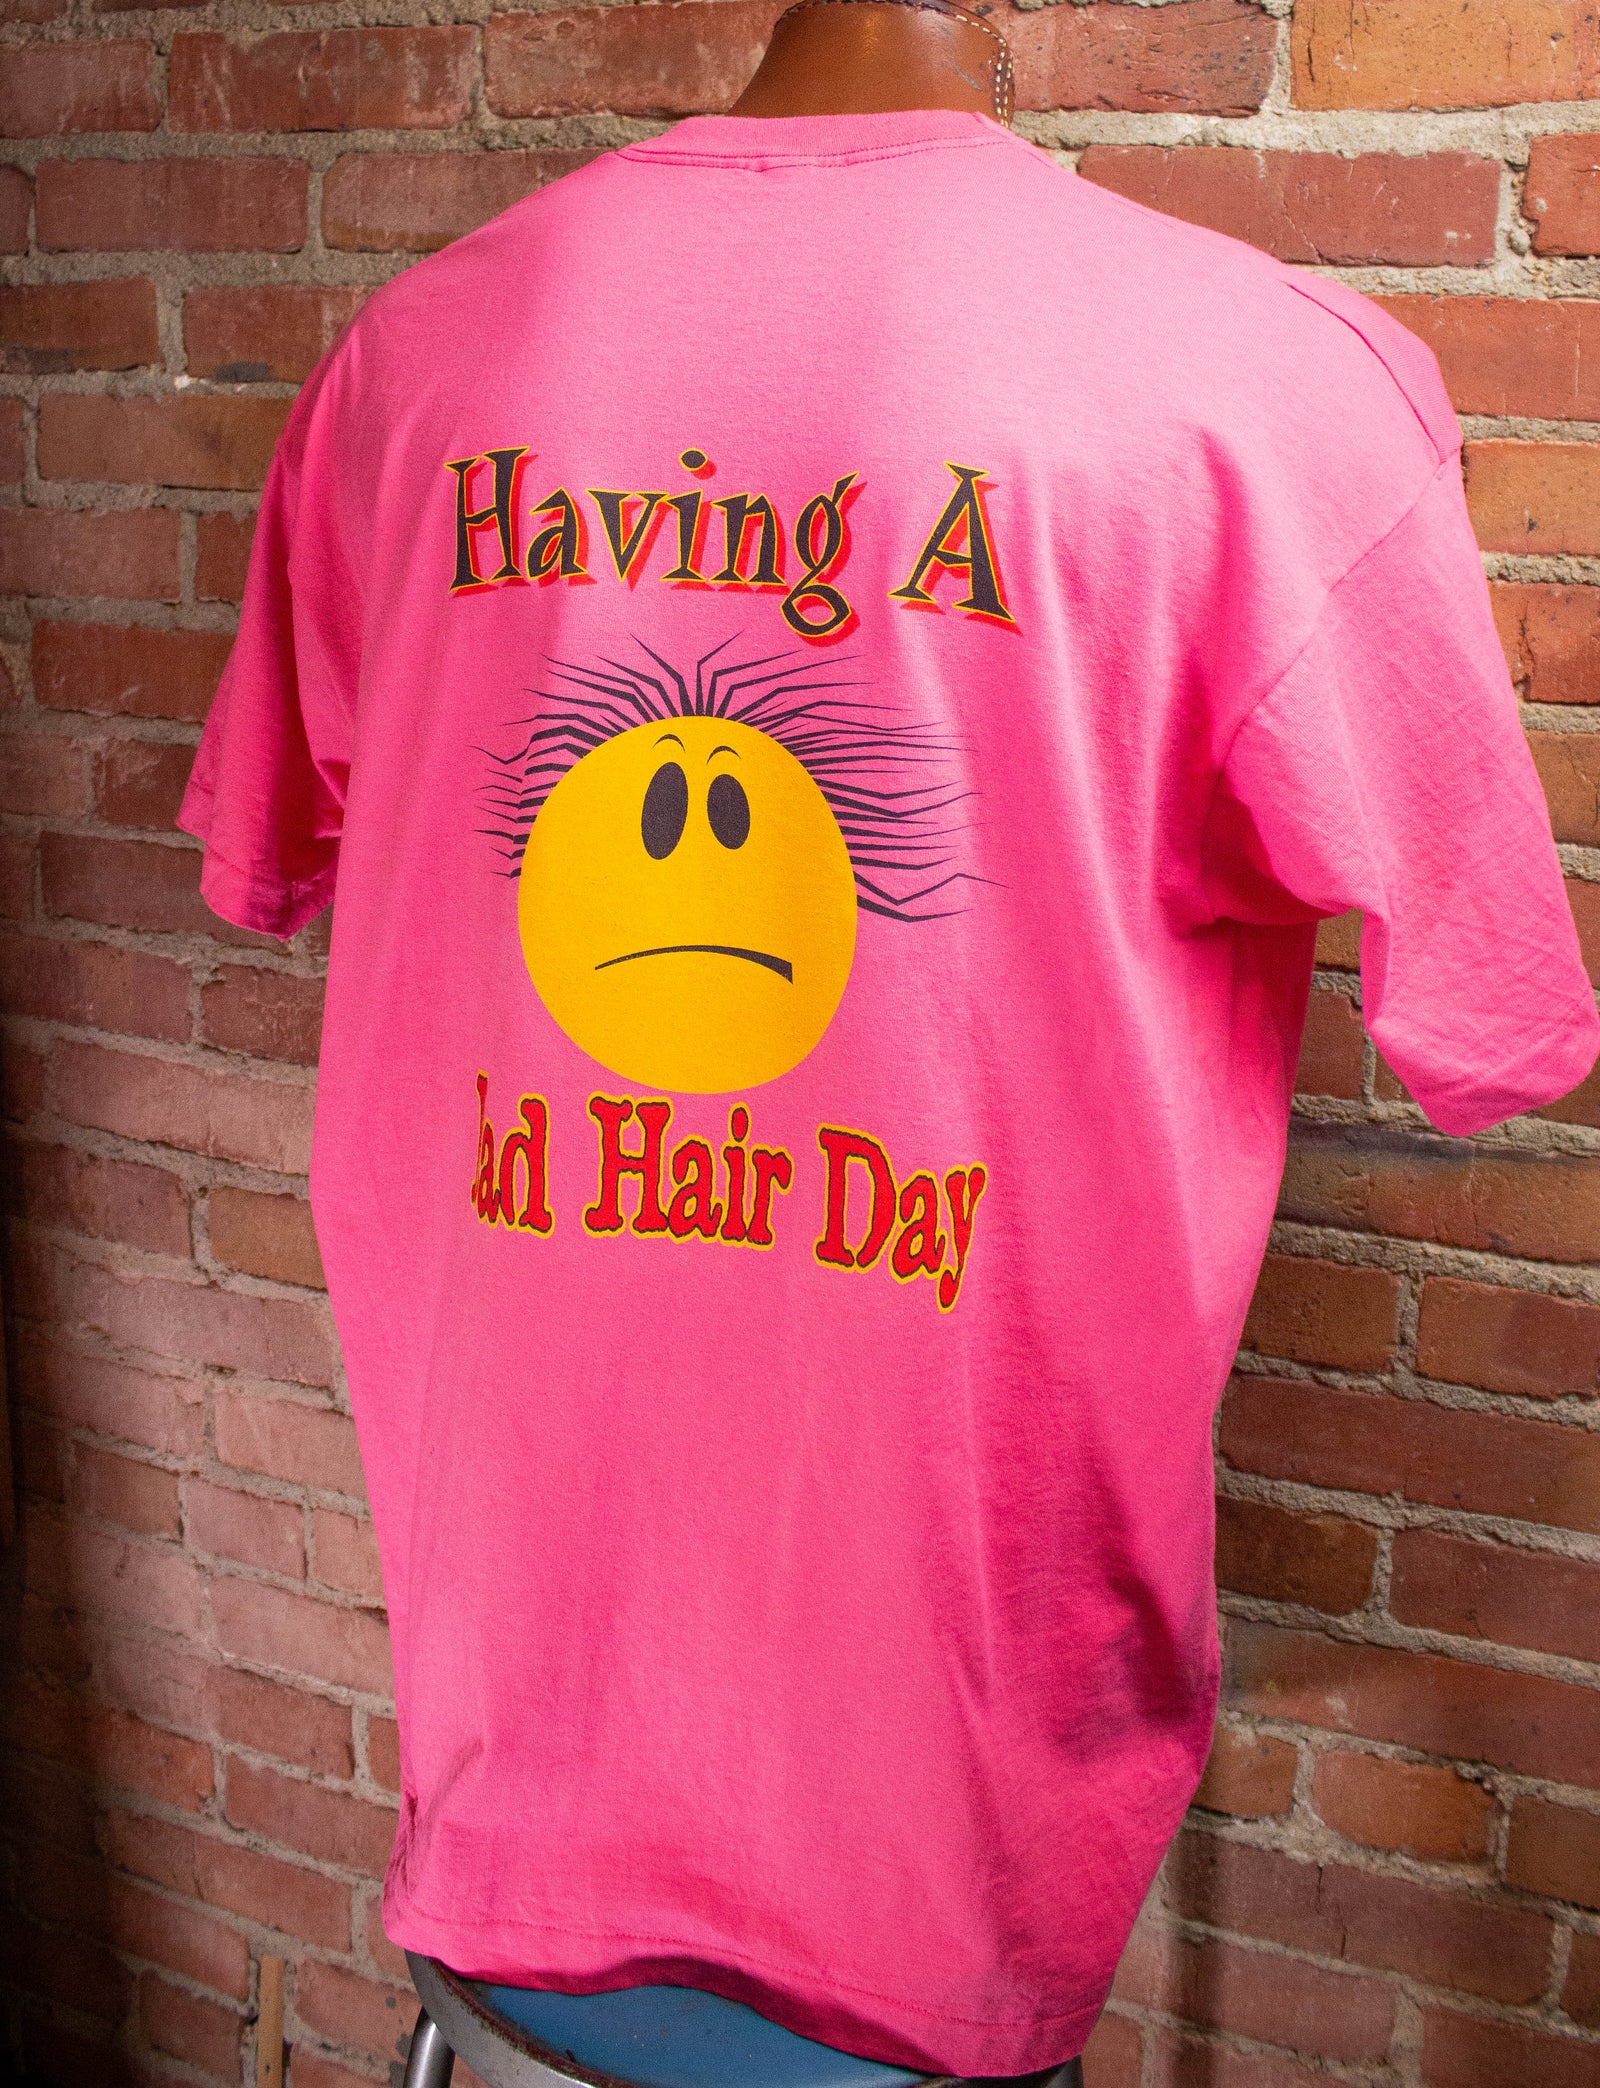 Vintage Having A Bad Hair Day Graphic T-Shirt 1990s XXL